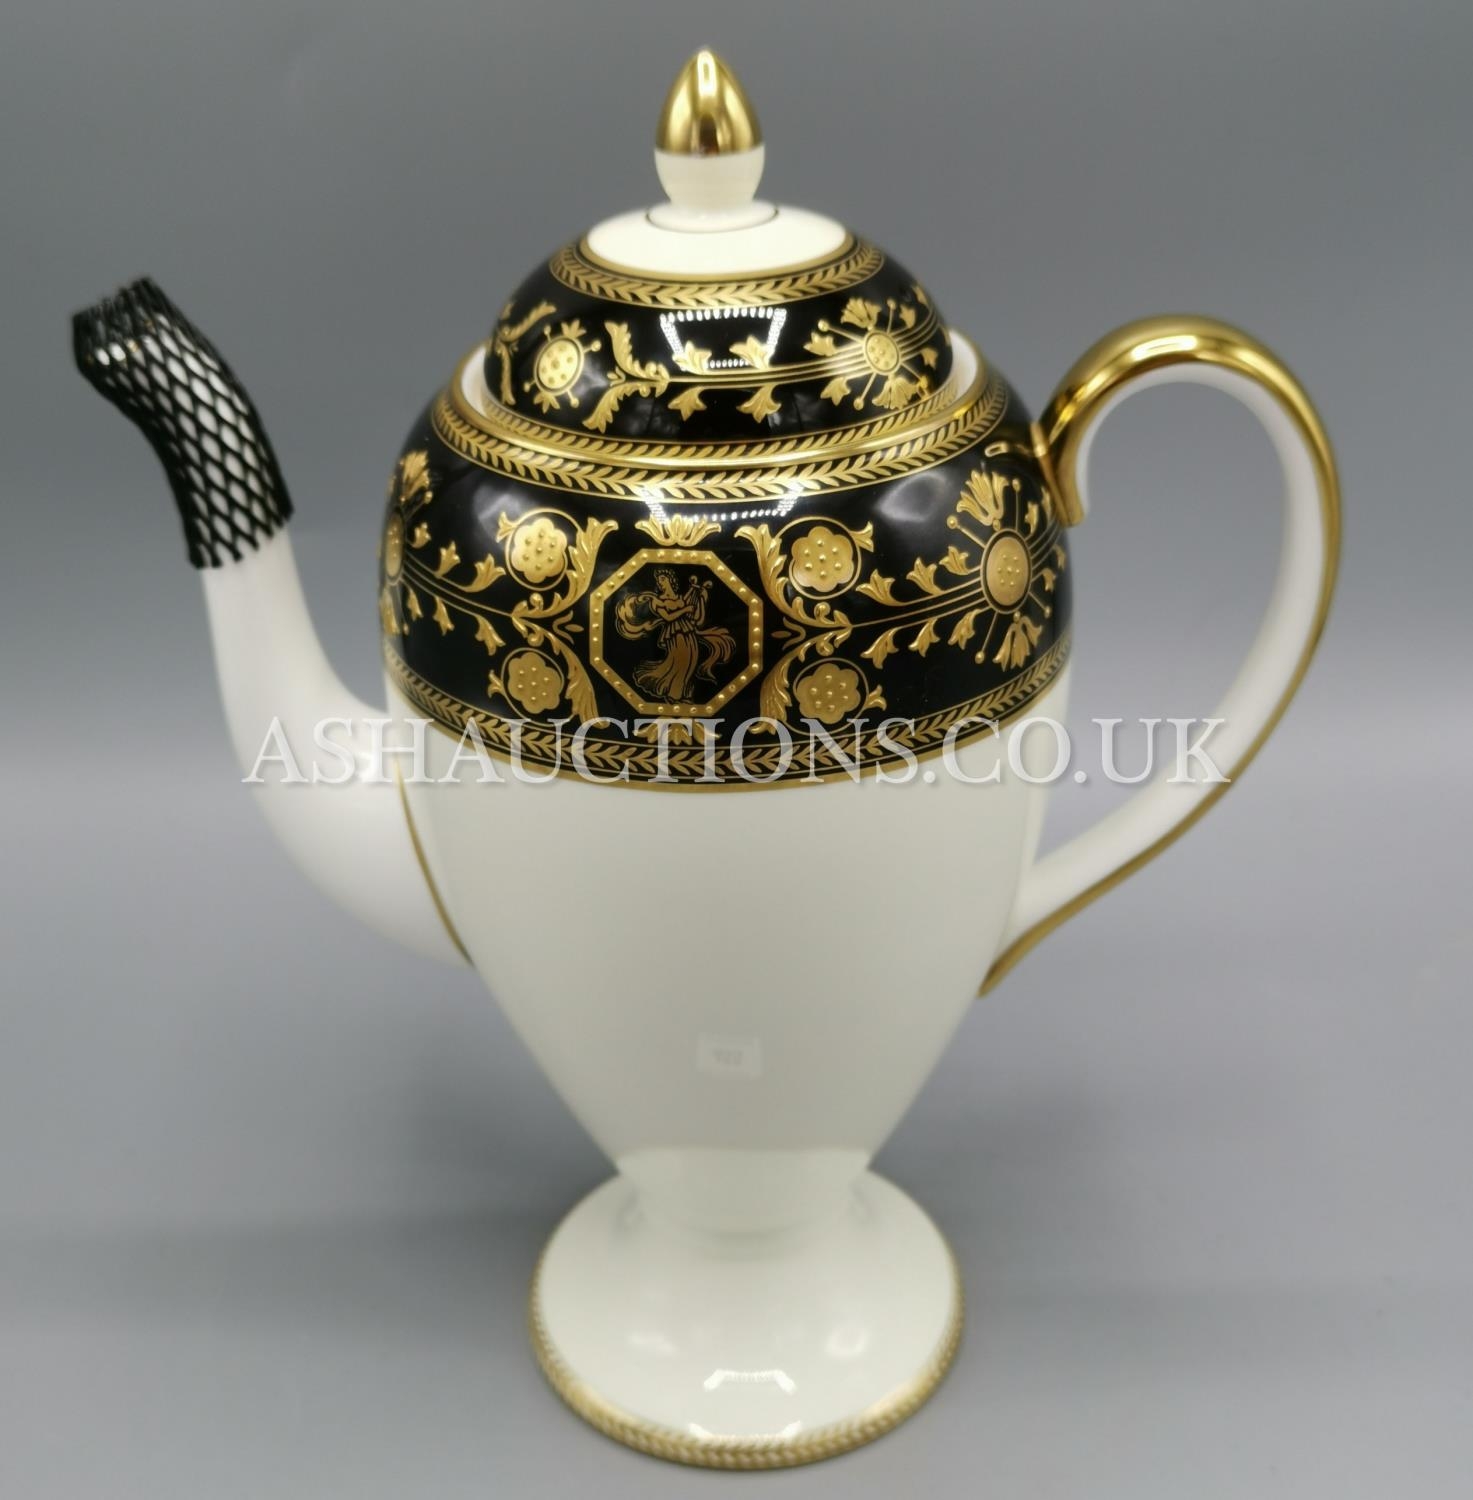 WEDGWOOD CHINA COFFEE POT IN THE BLACK ASTBURY DESIGN. (The